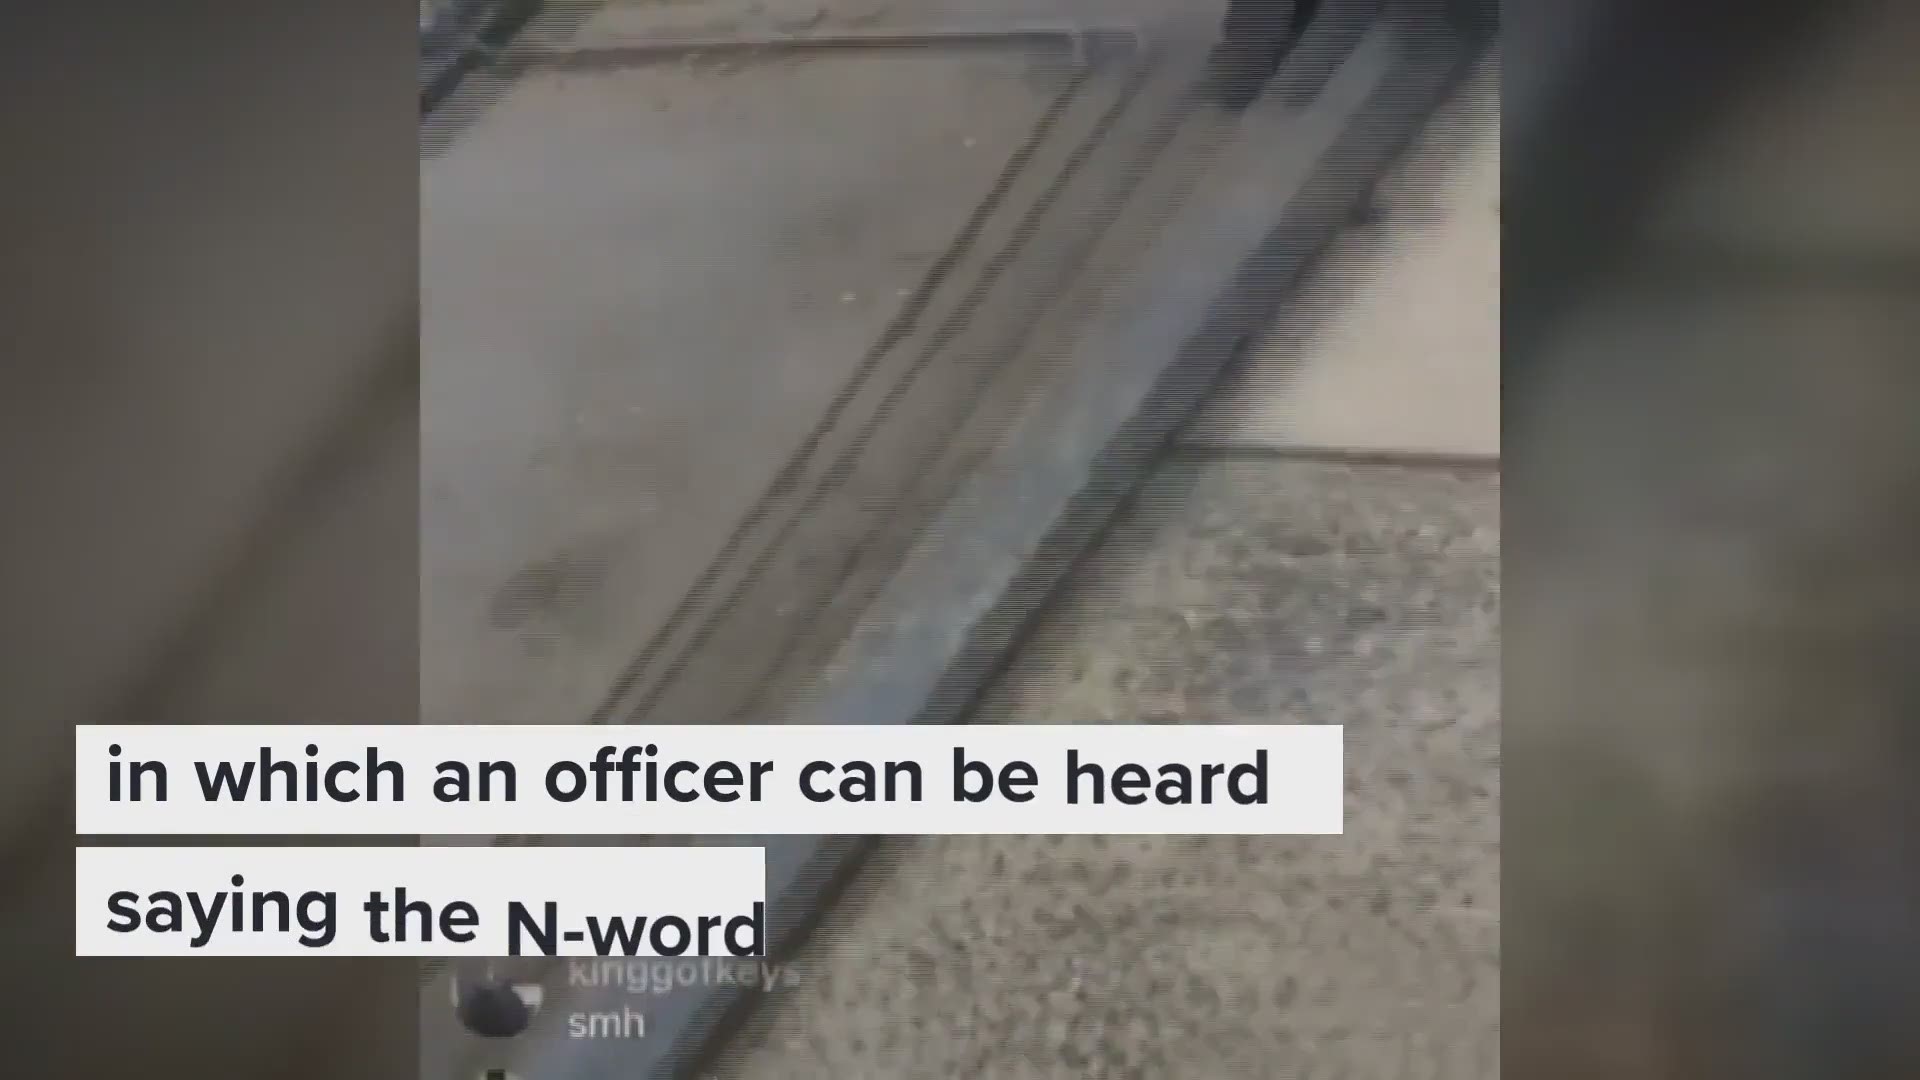 The Instagram video shows the officer in question using the N-word.